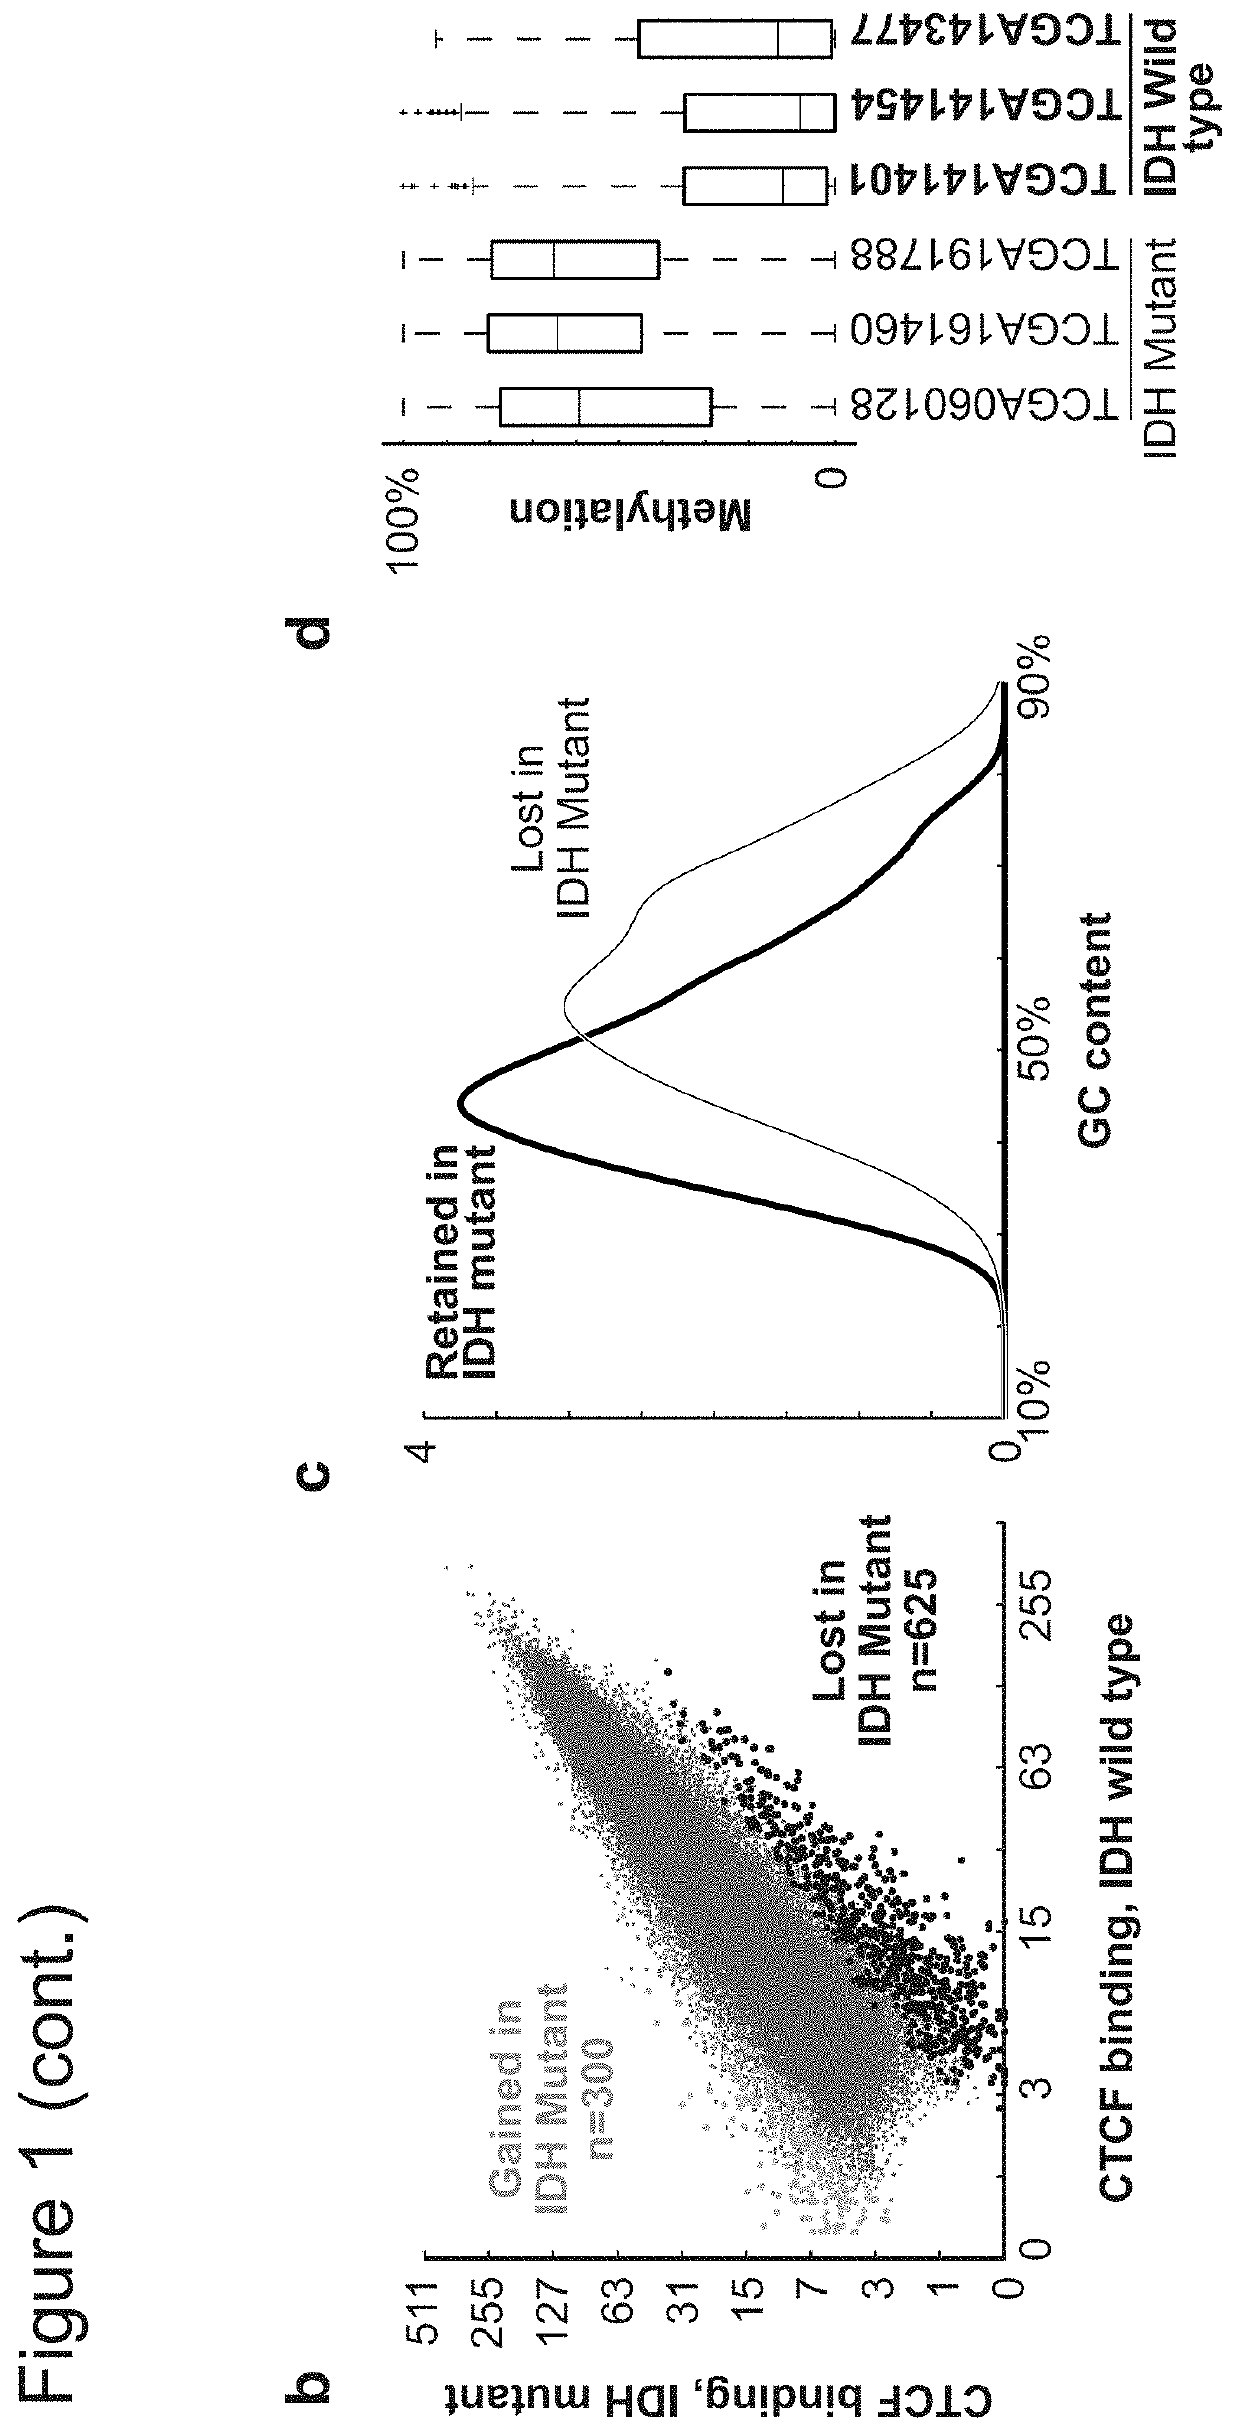 Methods of detecting insulator dysfunction and oncogene activation for screening, diagnosis and treatment of patients in need thereof